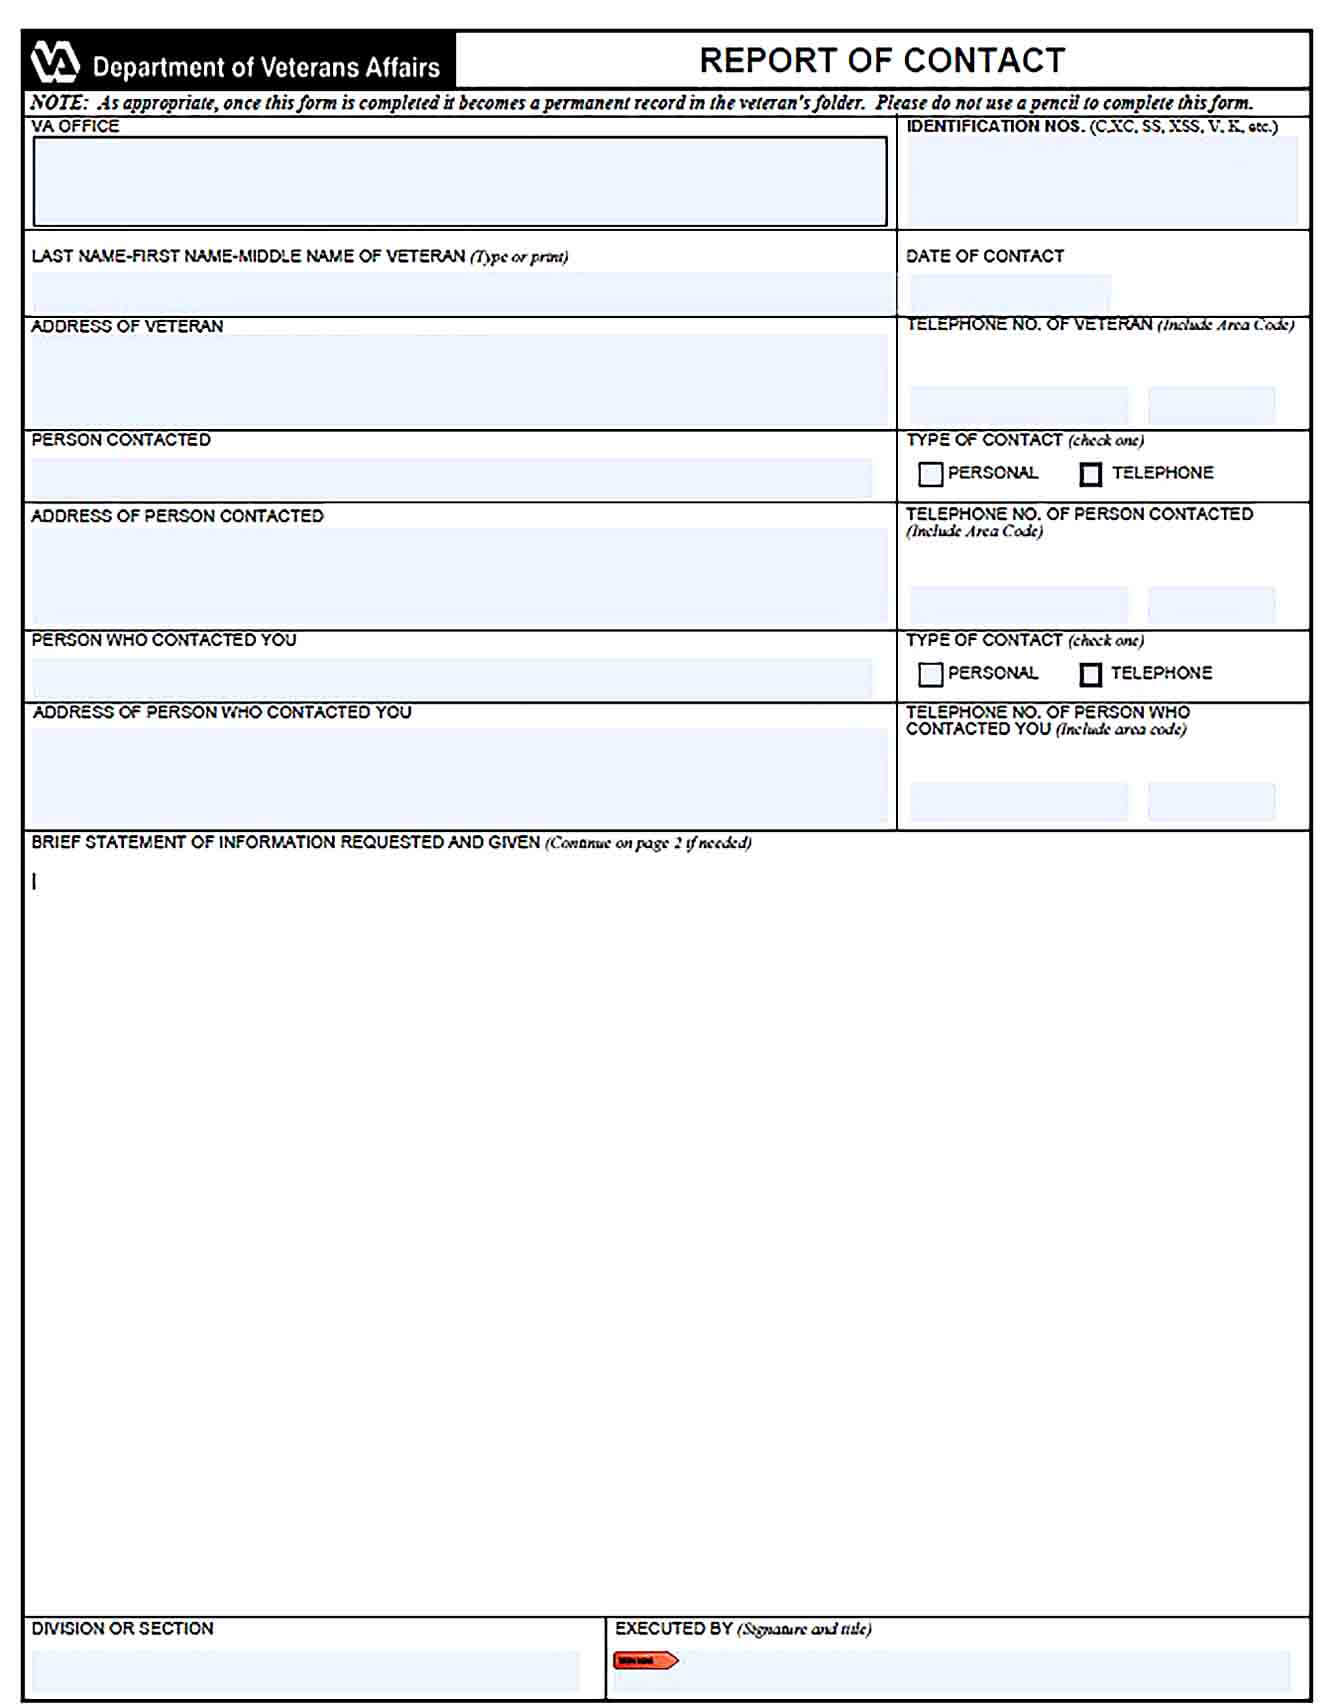 Sample Blank Contact Report Template 1